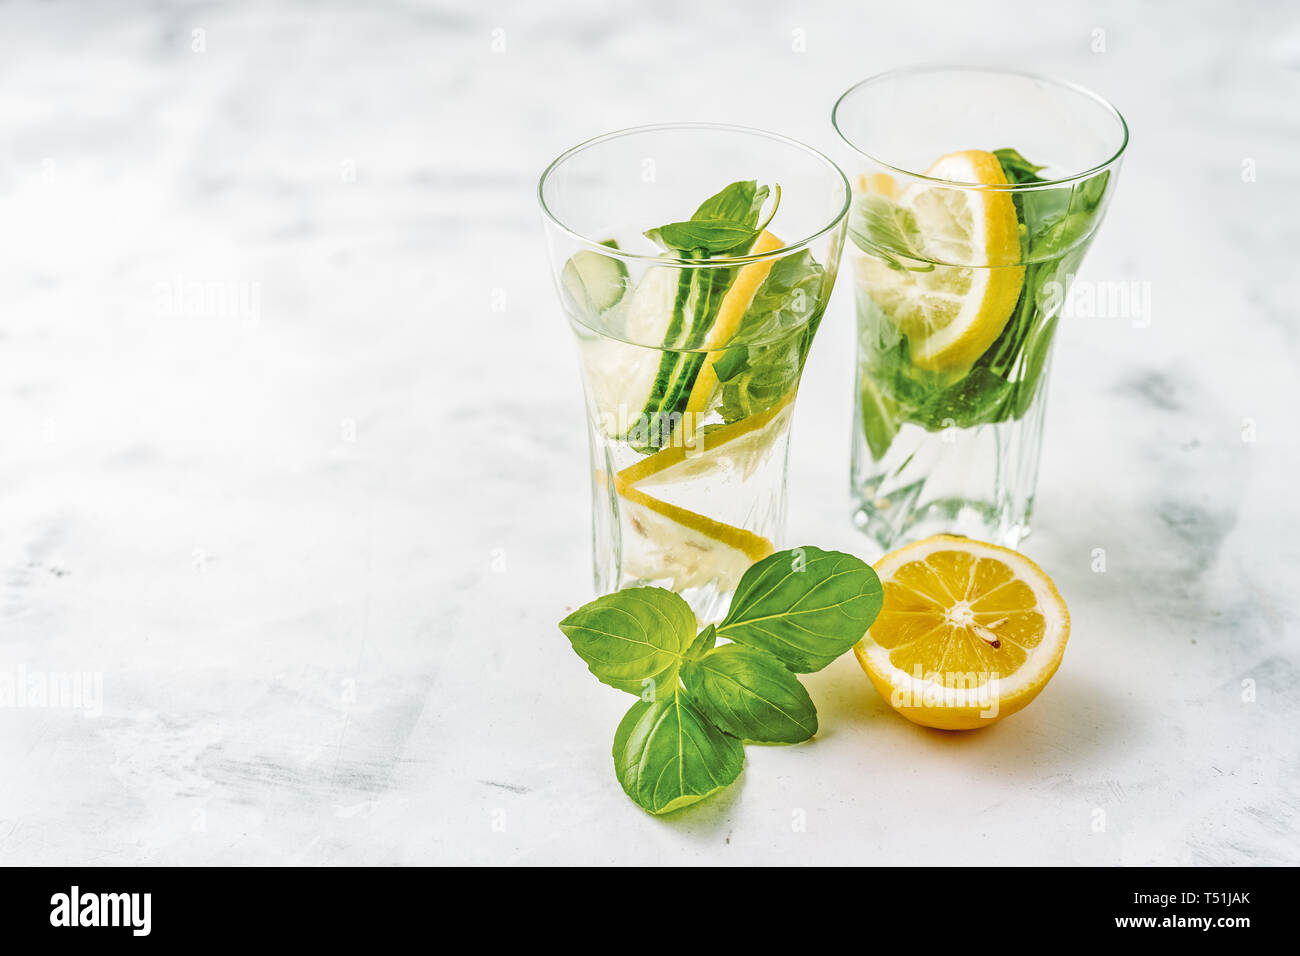 Infused water with lemon, cucmber and basil Stock Photo